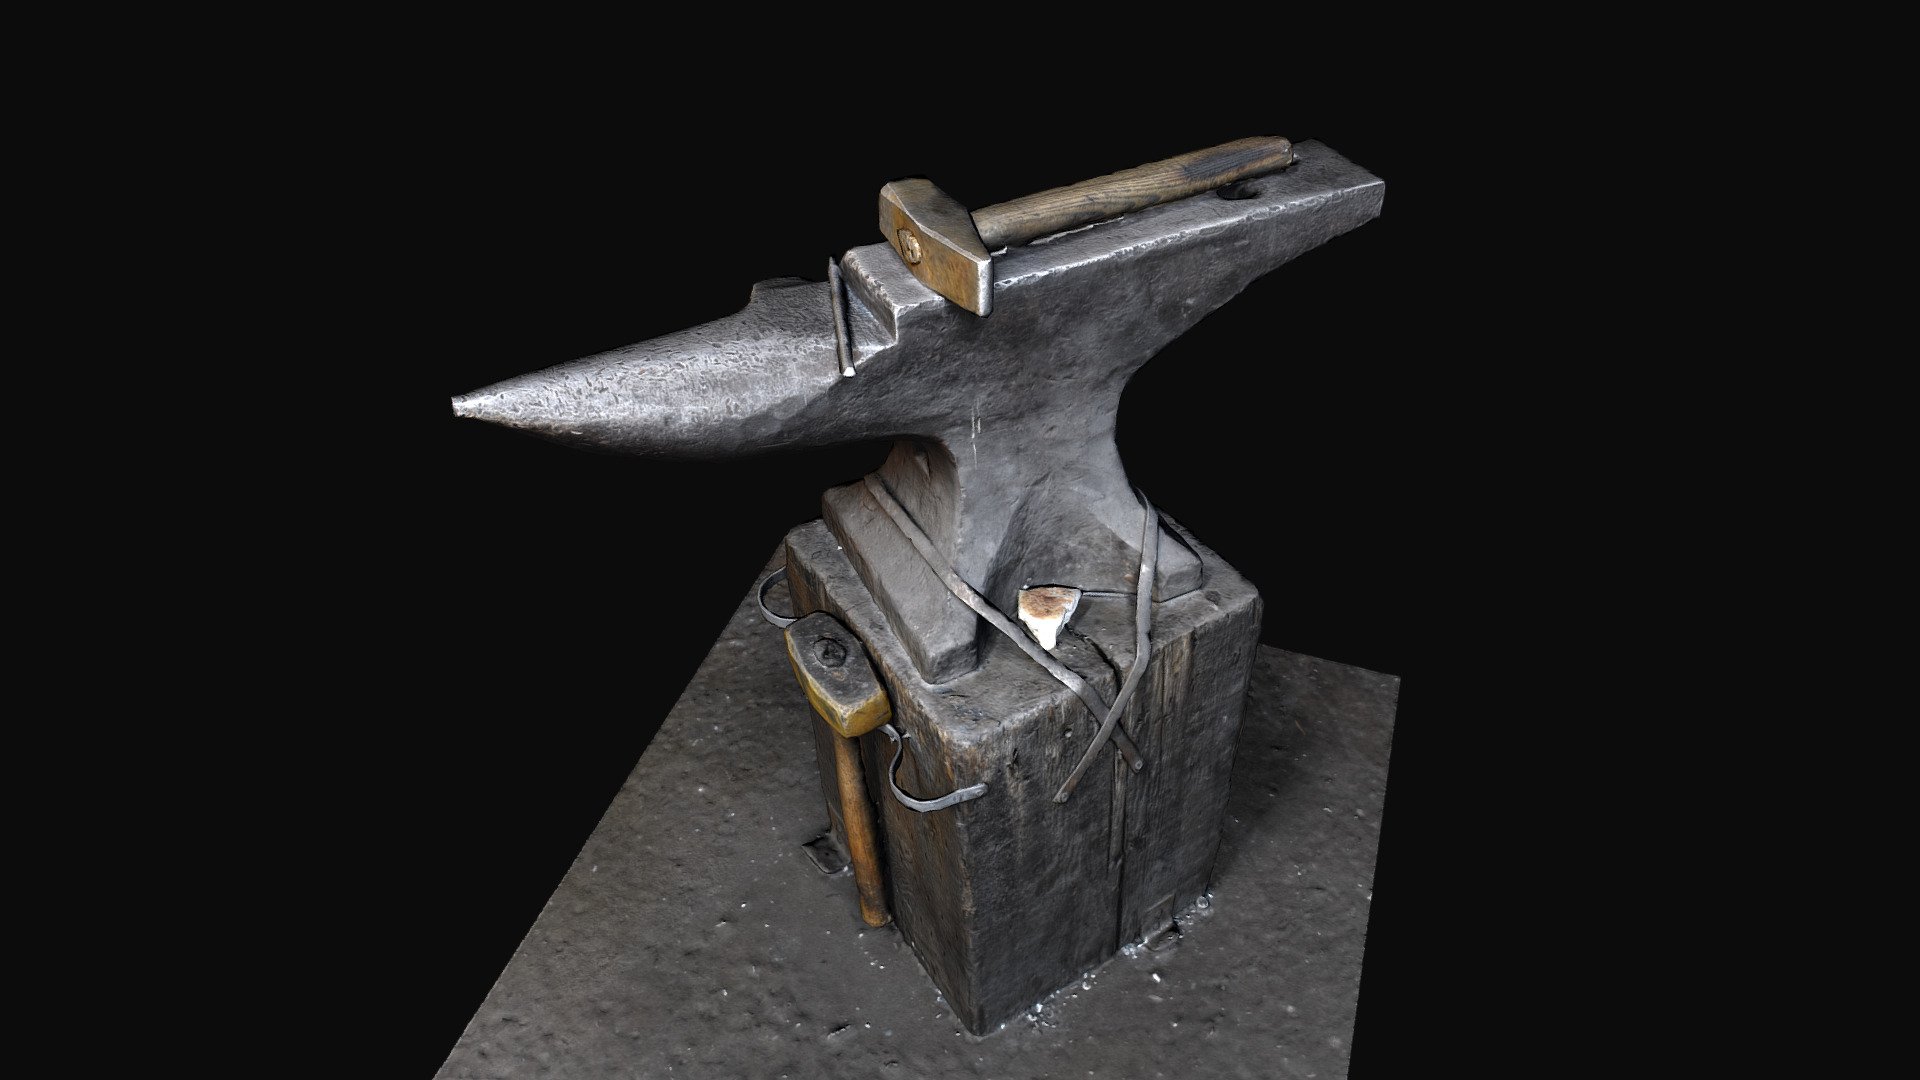 A capture of an anvil I did while I was chilling at Arms and Armor one day. Assembled in RealityCapture, no real post-processing done, except decimation. I am planning on going back and doing some more extensive captures of the shop, there are some excellent opportunities for awesome models there. I may also return to this model and give it the full treatment at some point.

 - Anvil Test - 3D model by Dale Utt (@turbulentorbit) 3d model